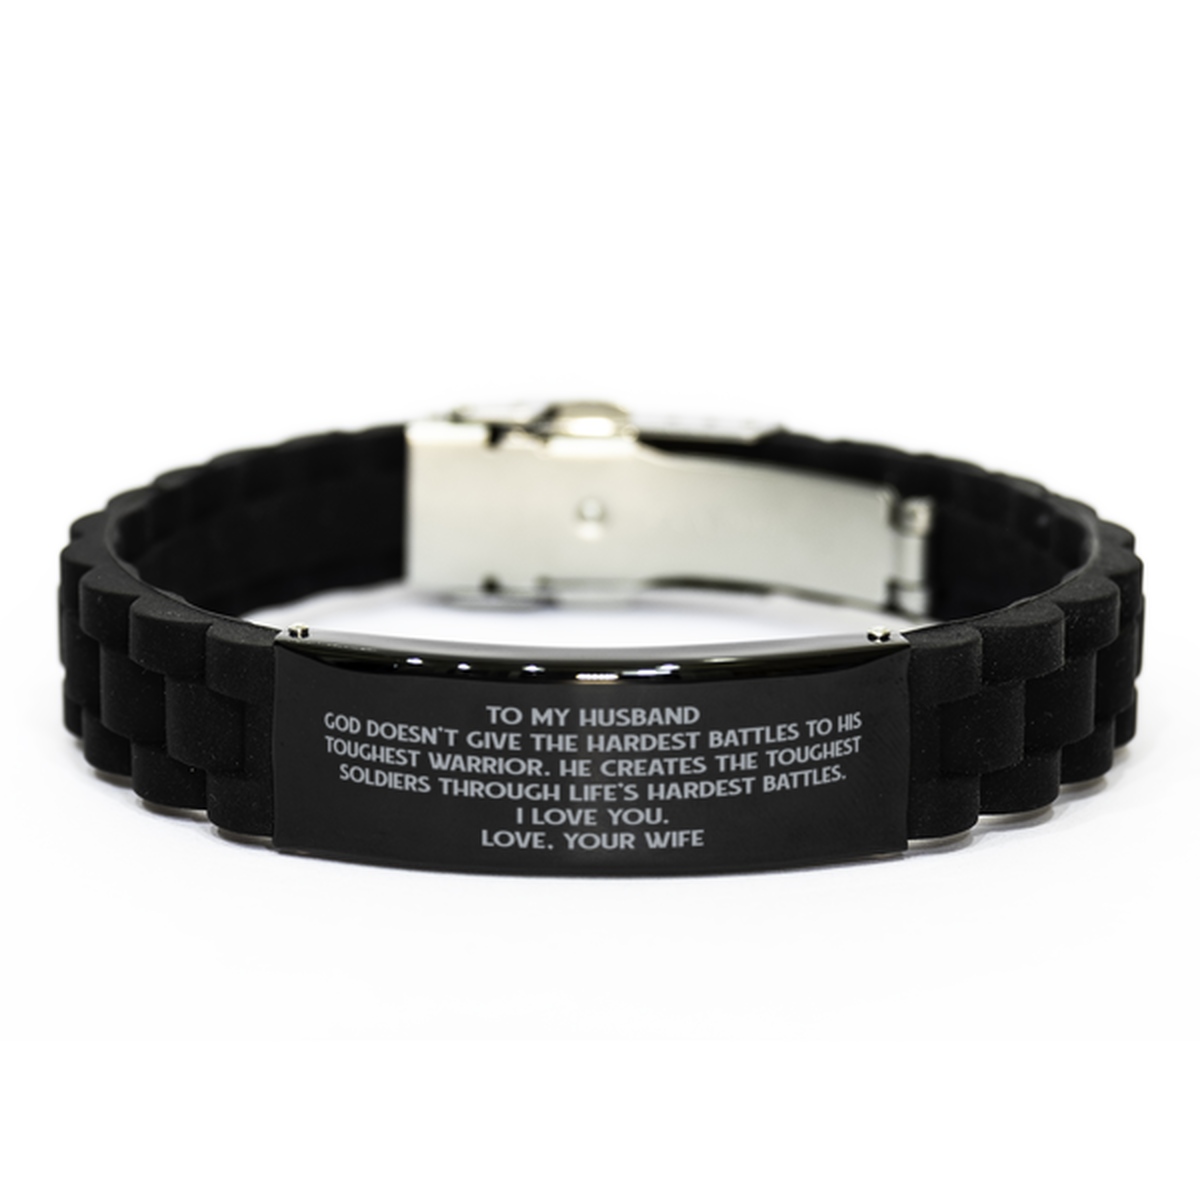 To My Husband Black Bracelet, God Creates The Toughest Soldiers, Anniversary Gifts For Husband From Wife, Birthday Gifts For Men